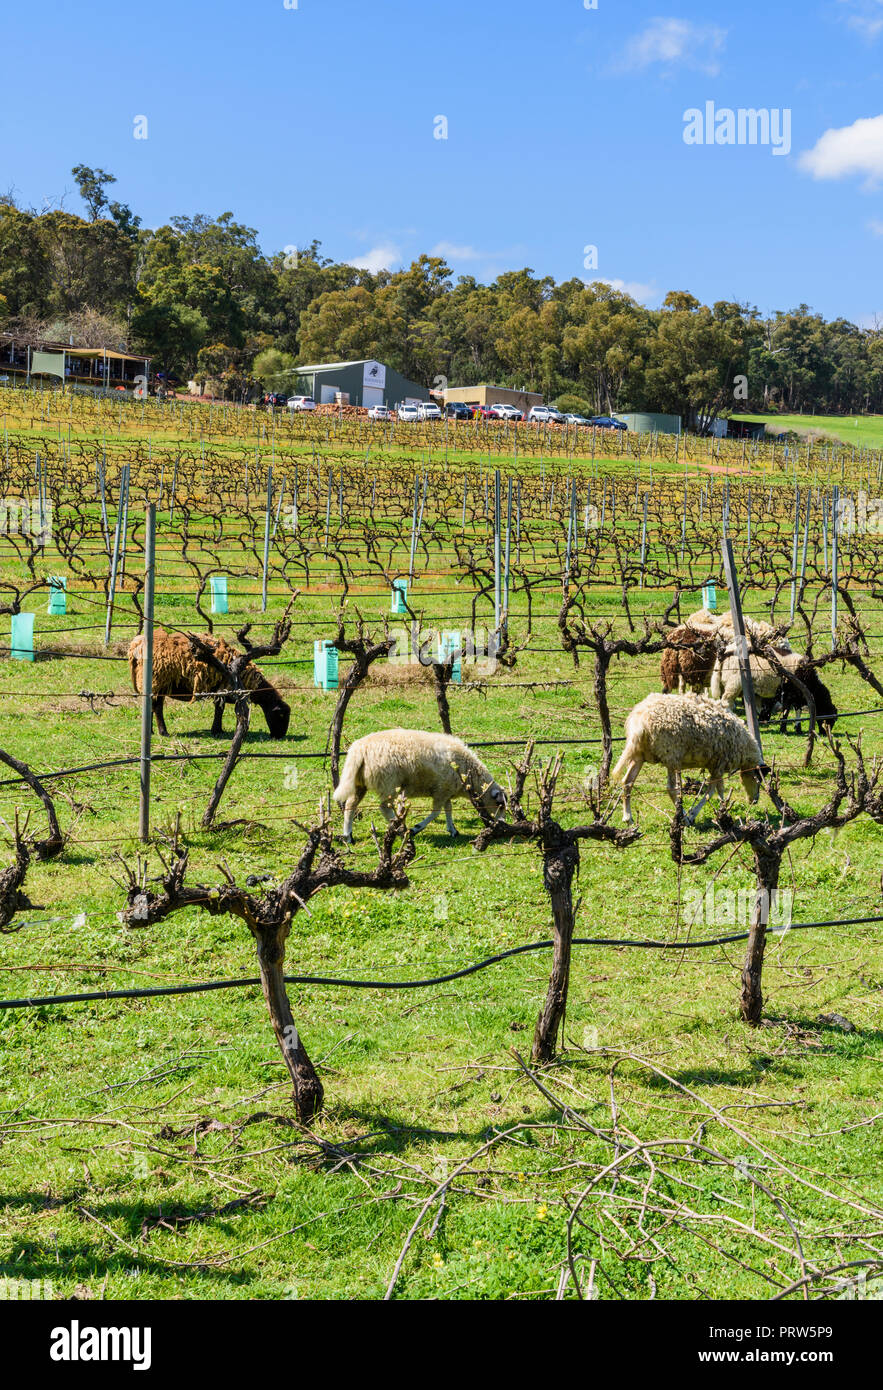 Environmentally friendly method of weed clearing between rows of grapevines at the Hainault Vineyard in the Bickley Valley, Western Australia Stock Photo